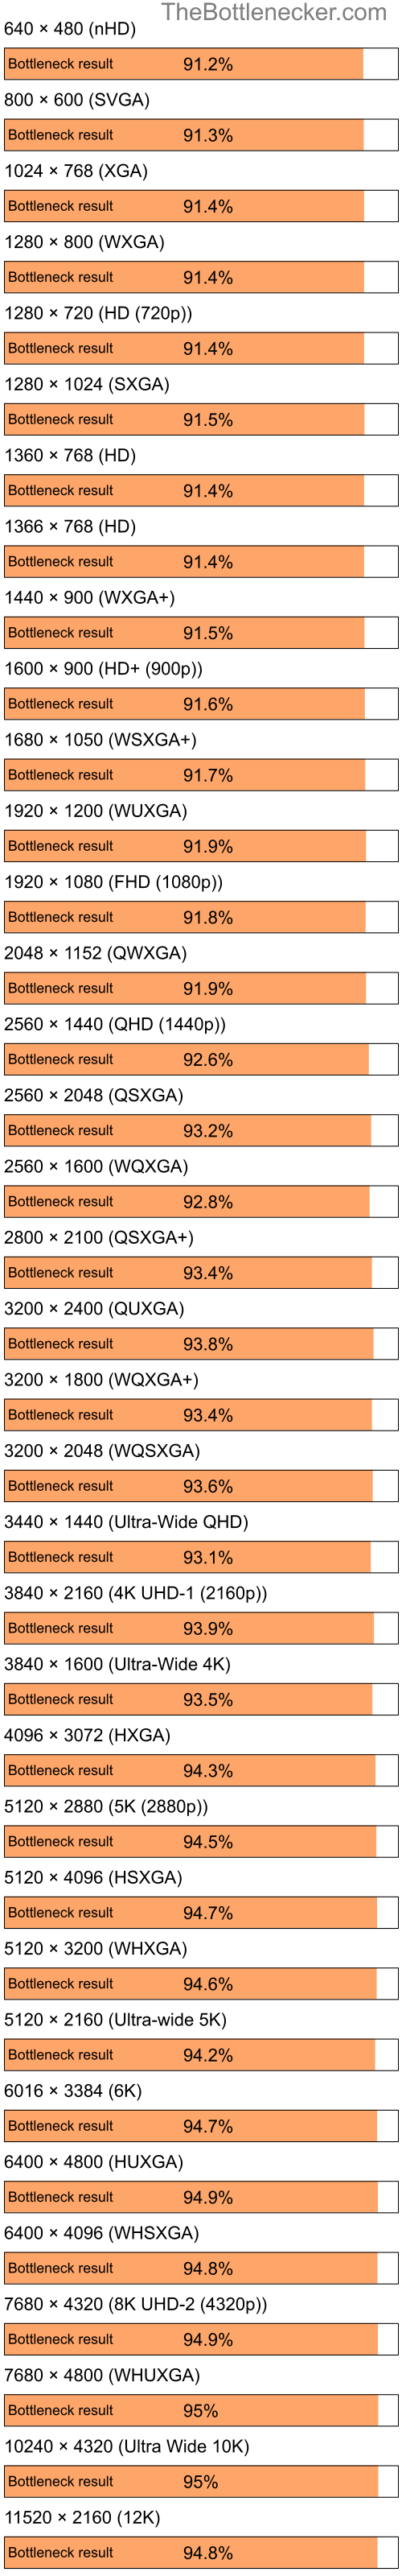 Bottleneck results by resolution for Intel Celeron M and AMD Mobility Radeon 9200 in General Tasks